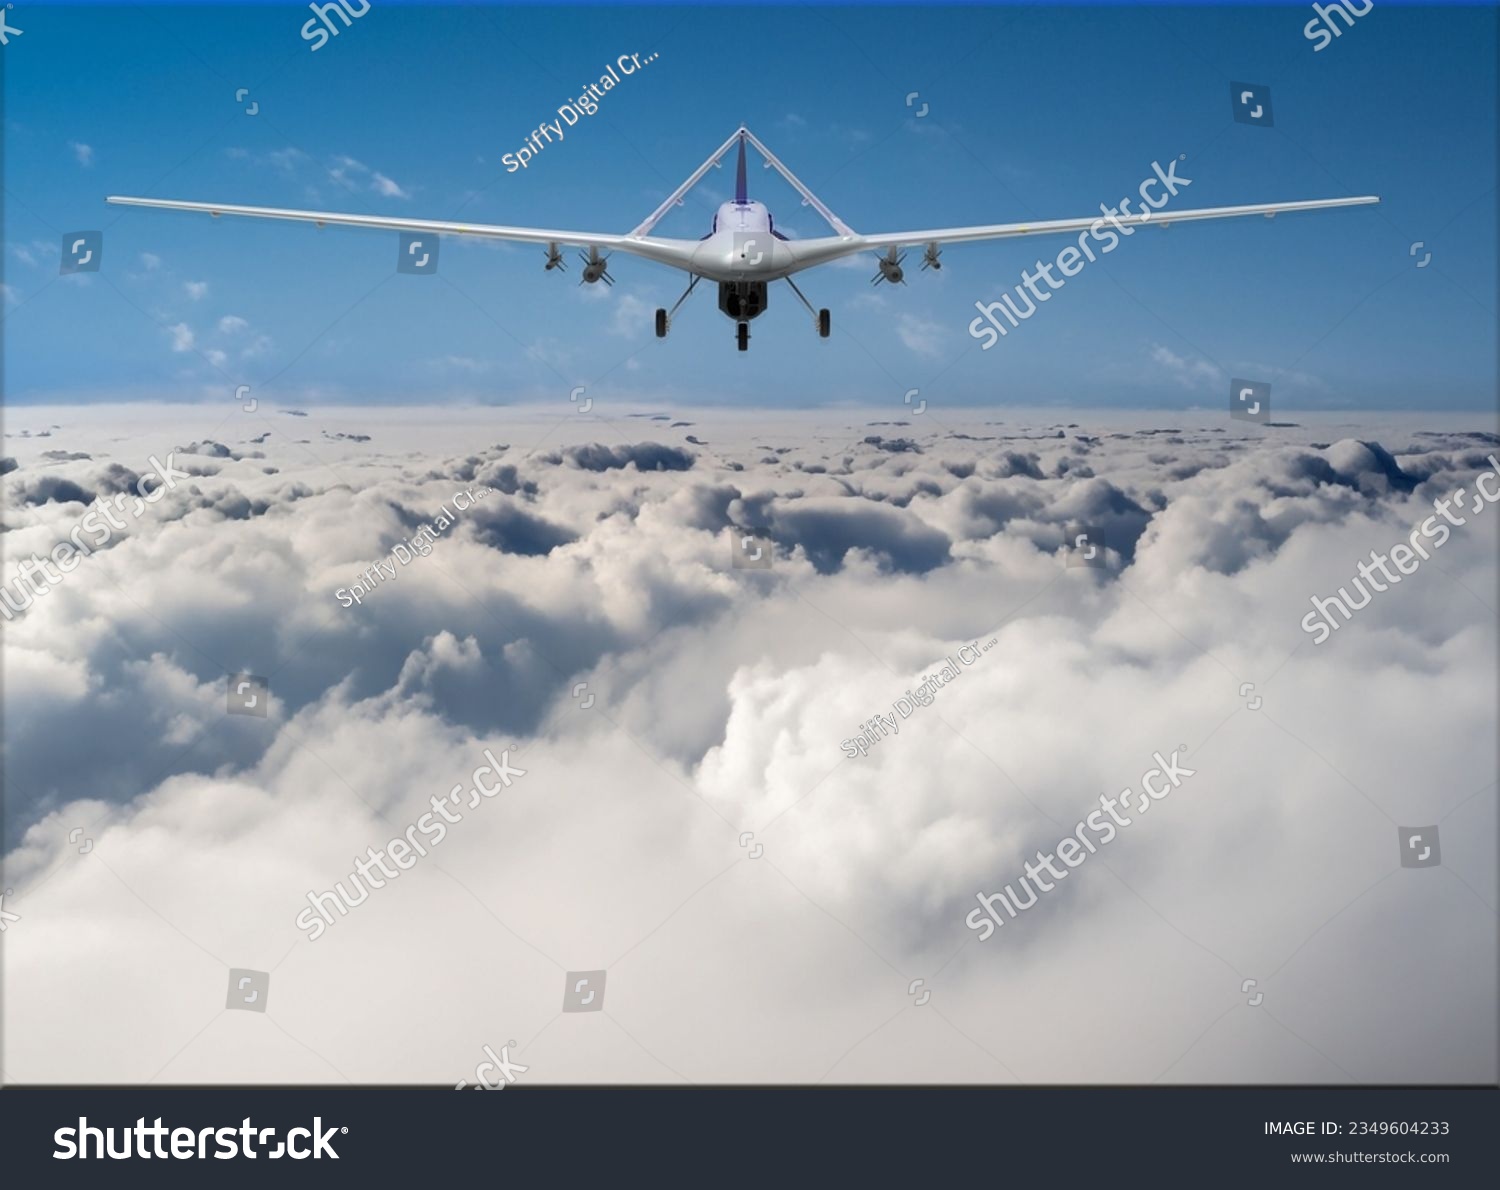 Bayraktar tb2 unmanned aerial vehicle gliding through the clouds. Bayraktar tb-2 combat drone in flight over the clouds. #2349604233